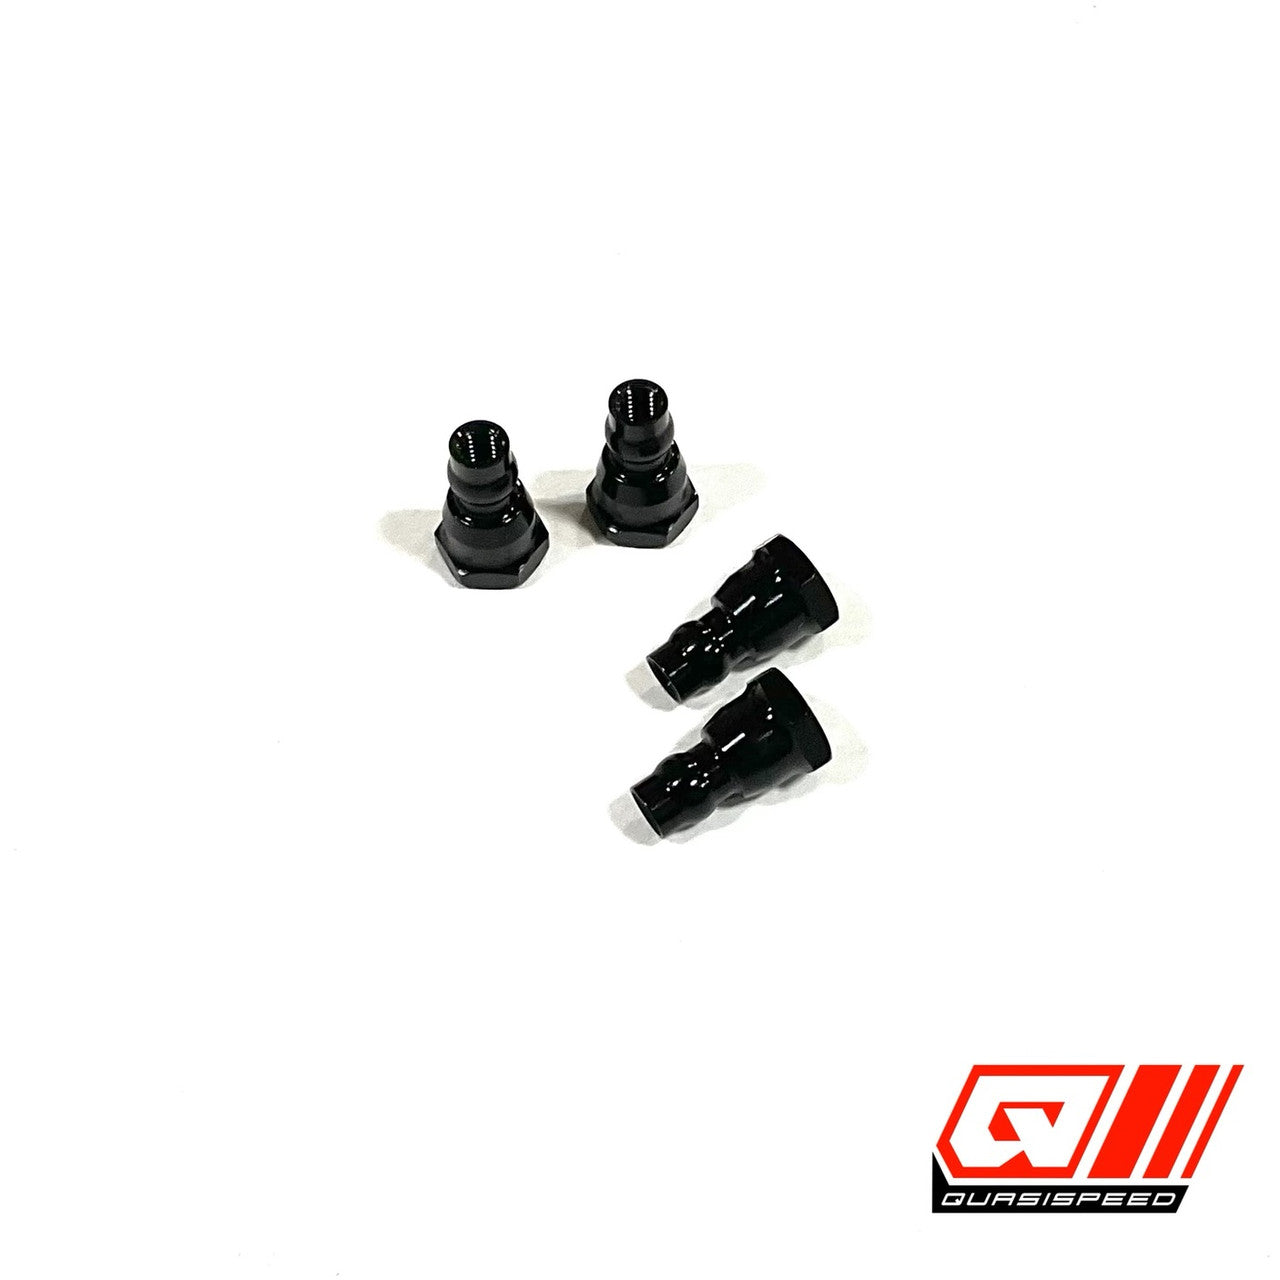 Metric 6mm Shock Stand Offs (4)